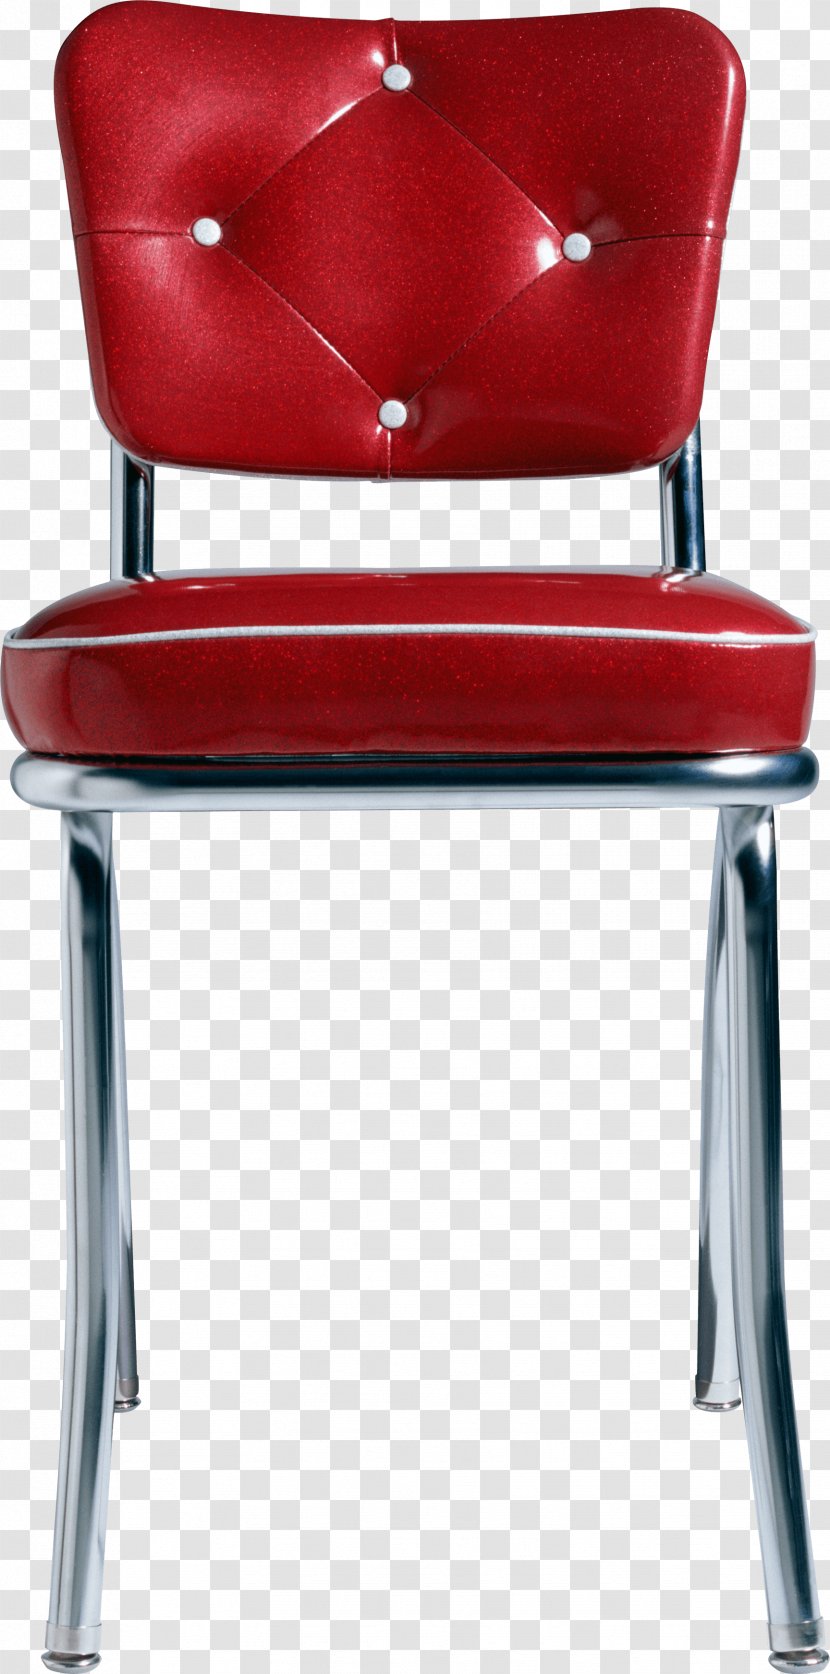 Chair Table Recliner Furniture - Foot Rests - Image Transparent PNG